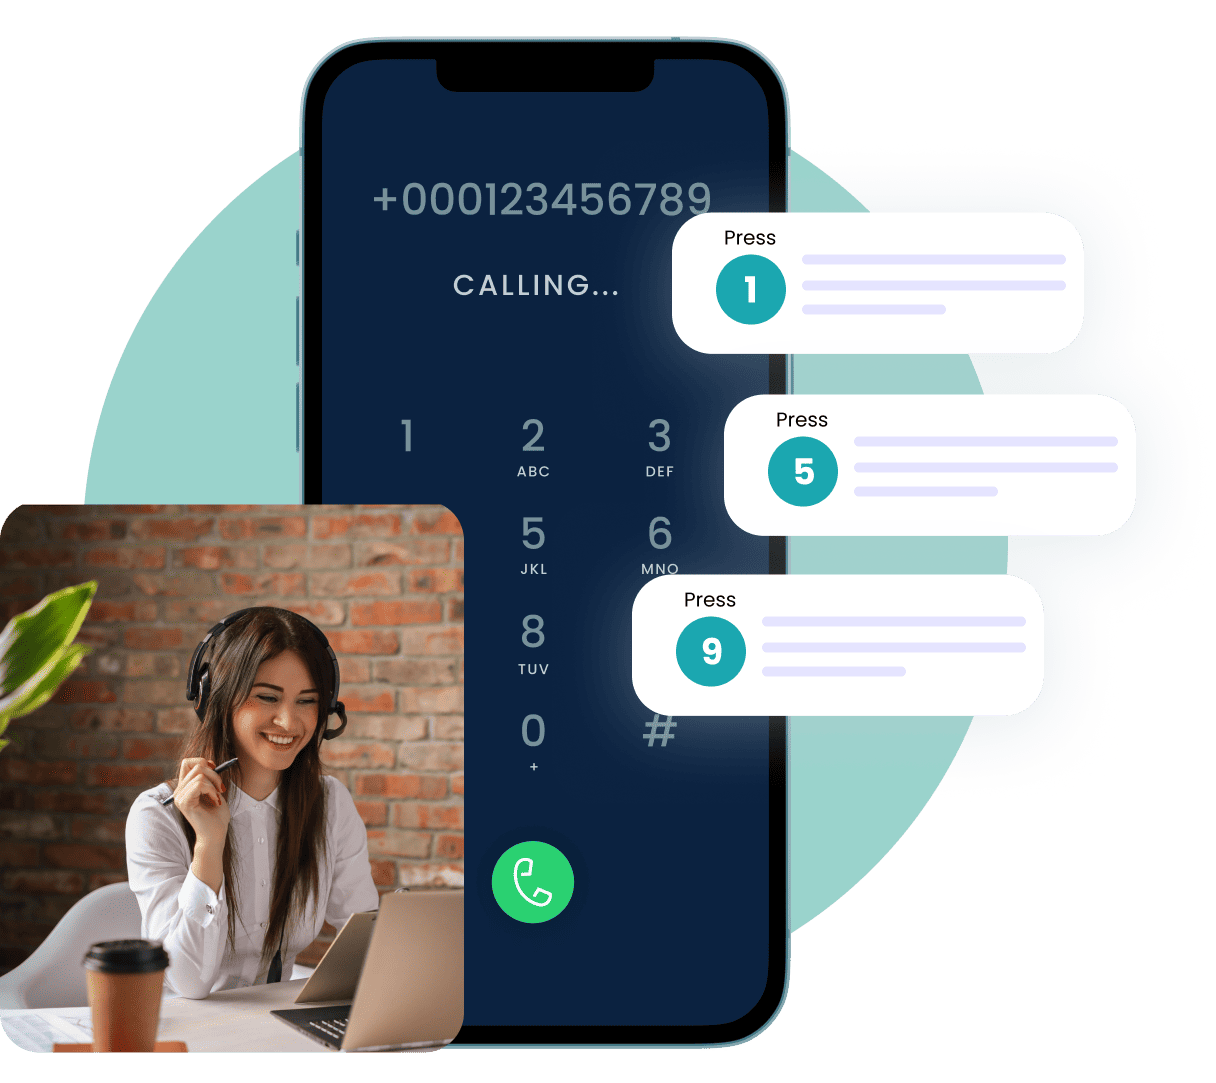 ” Transform customer connections with IVR system ”